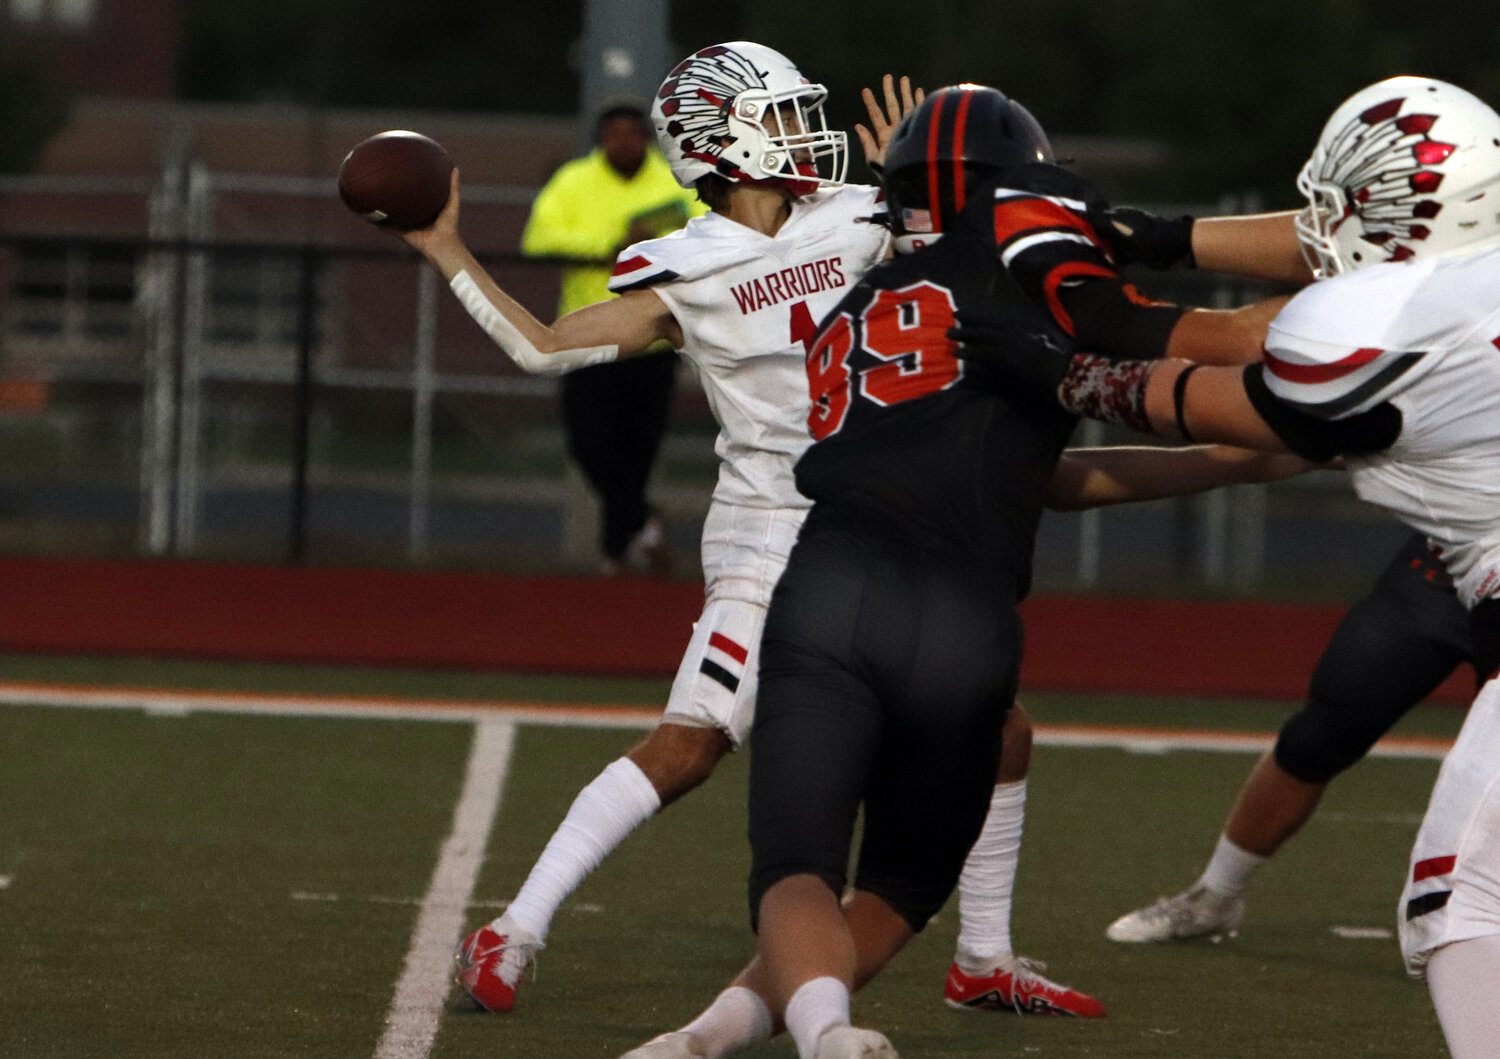 Quarterback Charlie Blondin throws a touchdown pass to Mason Thompson during the second quarter of last week’s game.